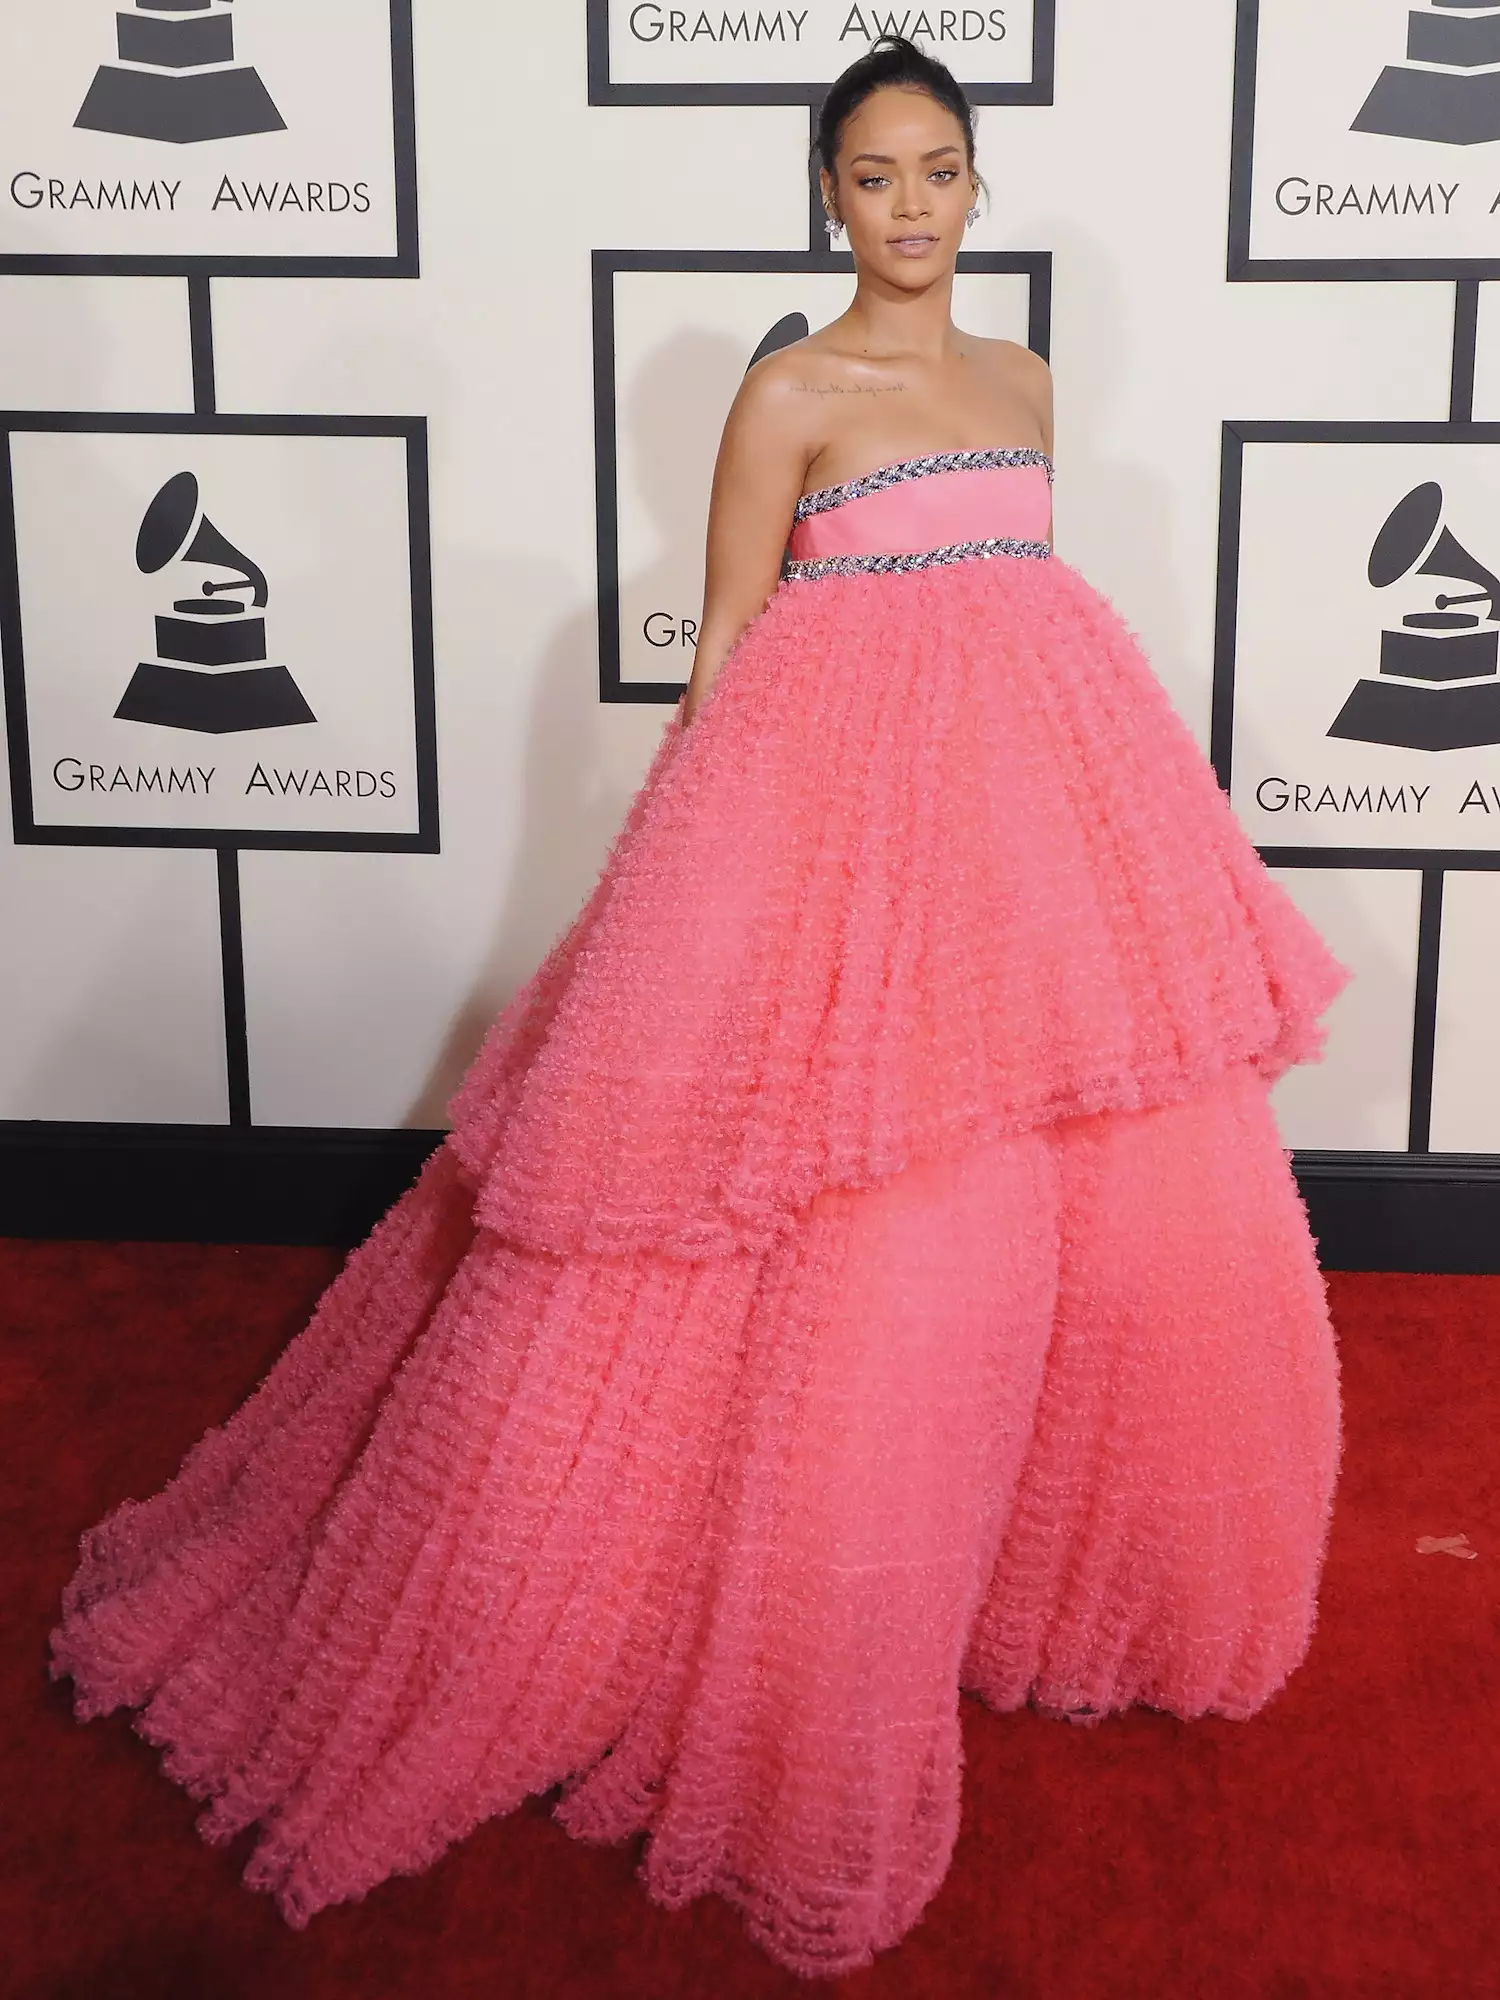 Rihanna wears a pink tulle Giambattista Valli gown and simple updo to the 2015 Grammy awards